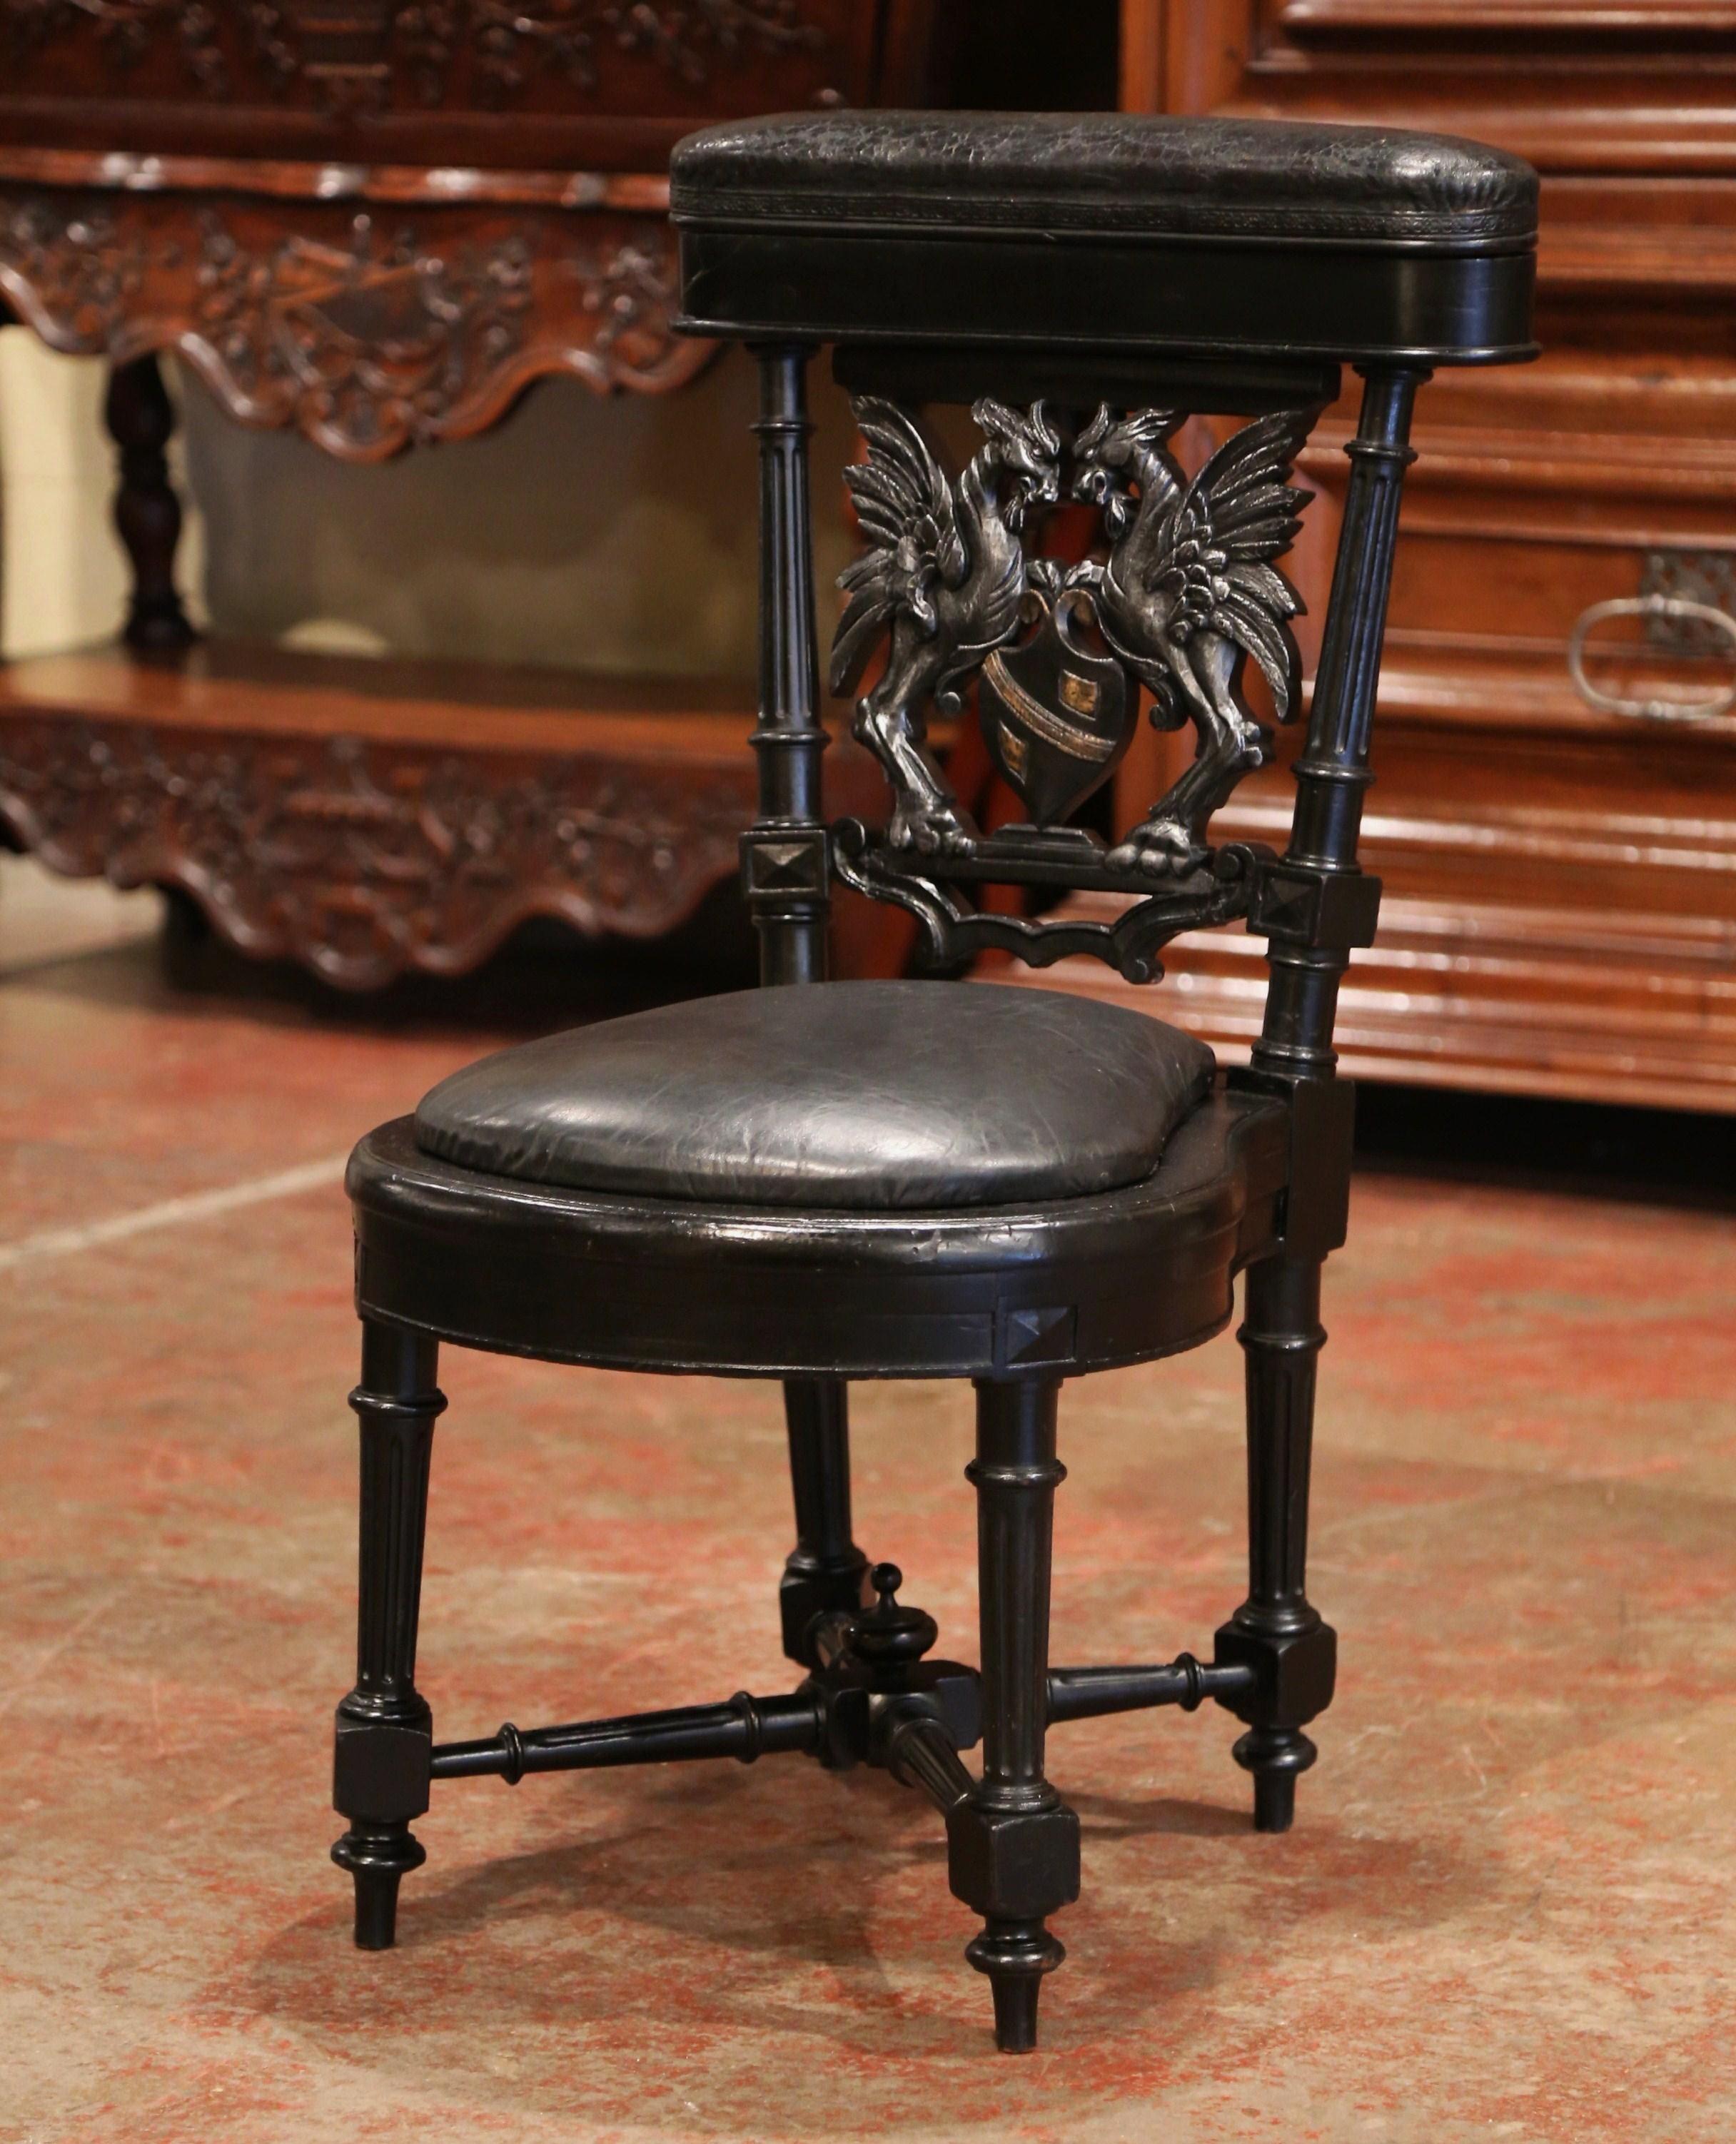 This elegant antique cigar chair was crafted in France, circa 1870. The blackened chair stands on four tapered and fluted legs joined at the bottom with a stretcher and decorative central finial, and features exquisite carvings including a family